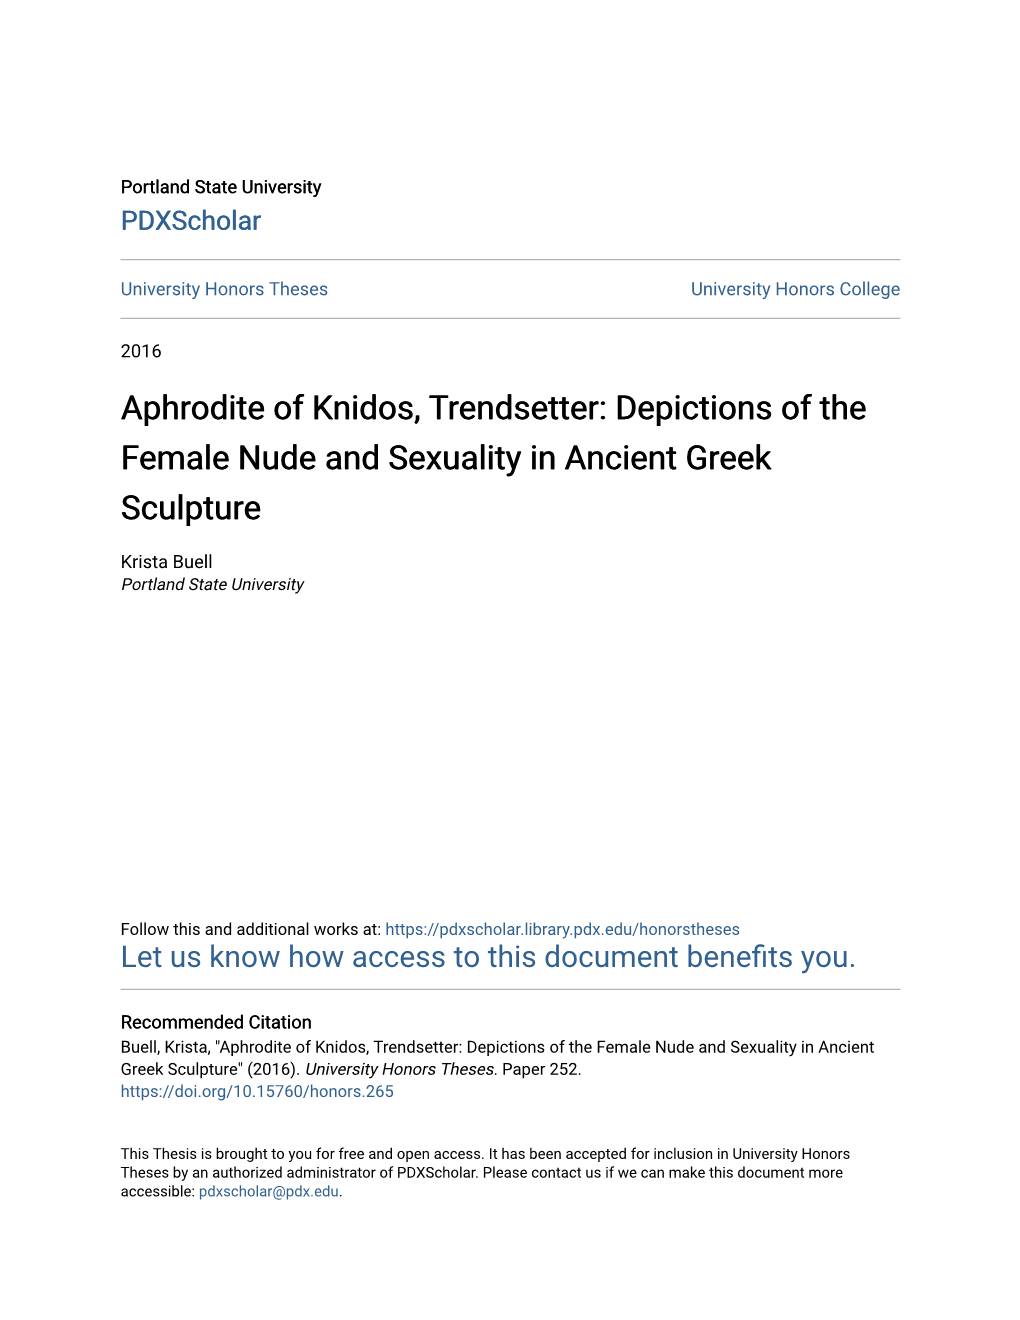 Aphrodite of Knidos, Trendsetter: Depictions of the Female Nude and Sexuality in Ancient Greek Sculpture